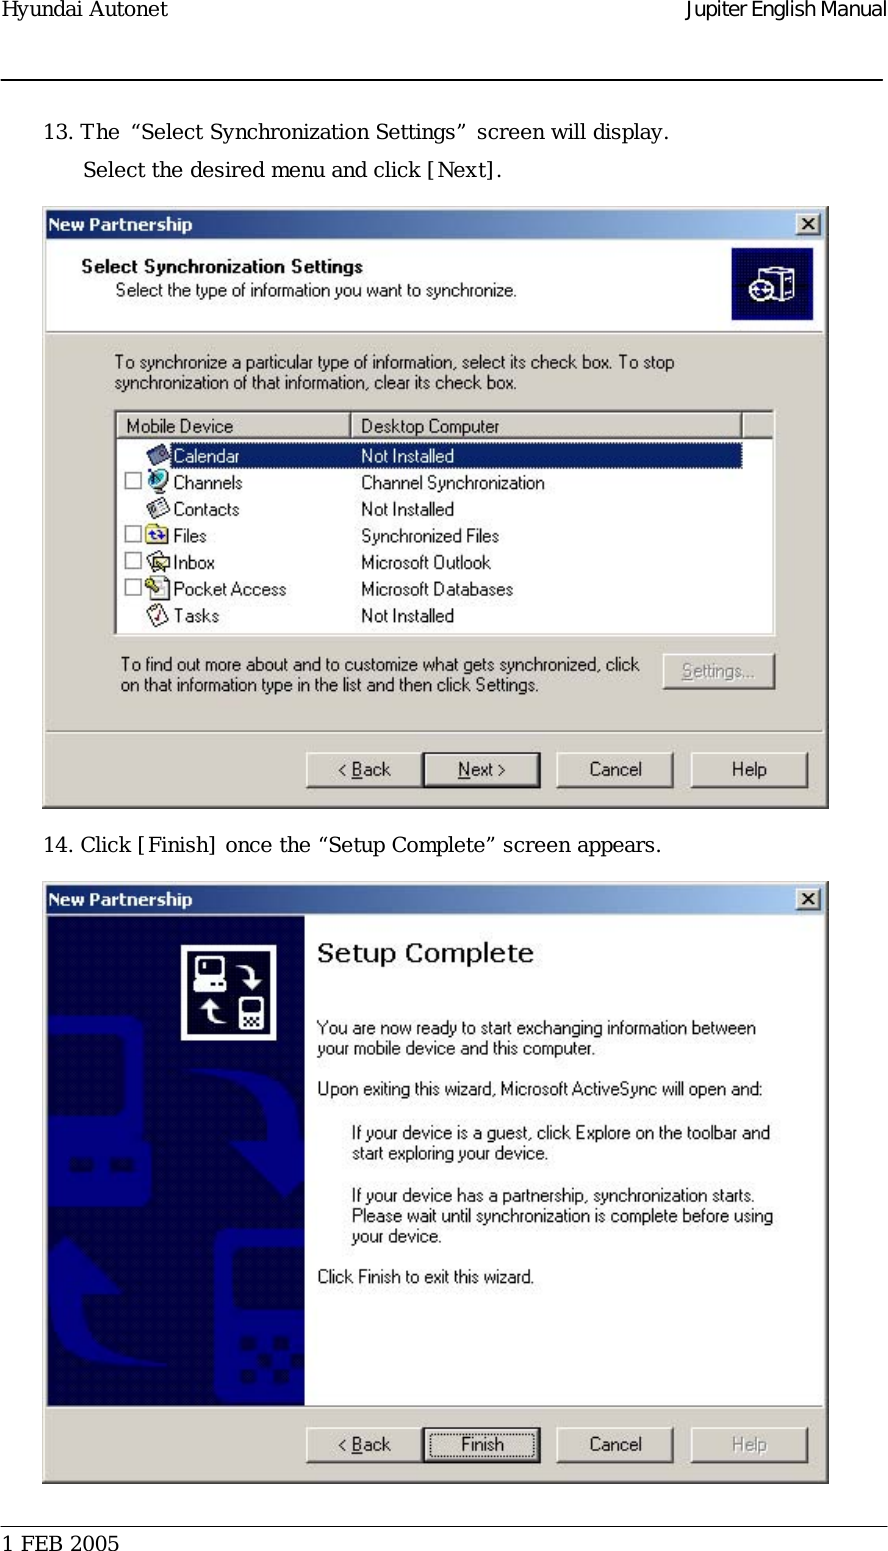 Hyundai Autonet    Jupiter English Manual 13. The “Select Synchronization Settings” screen will display.   Select the desired menu and click [Next].   14. Click [Finish] once the “Setup Complete” screen appears.    1 FEB 2005    